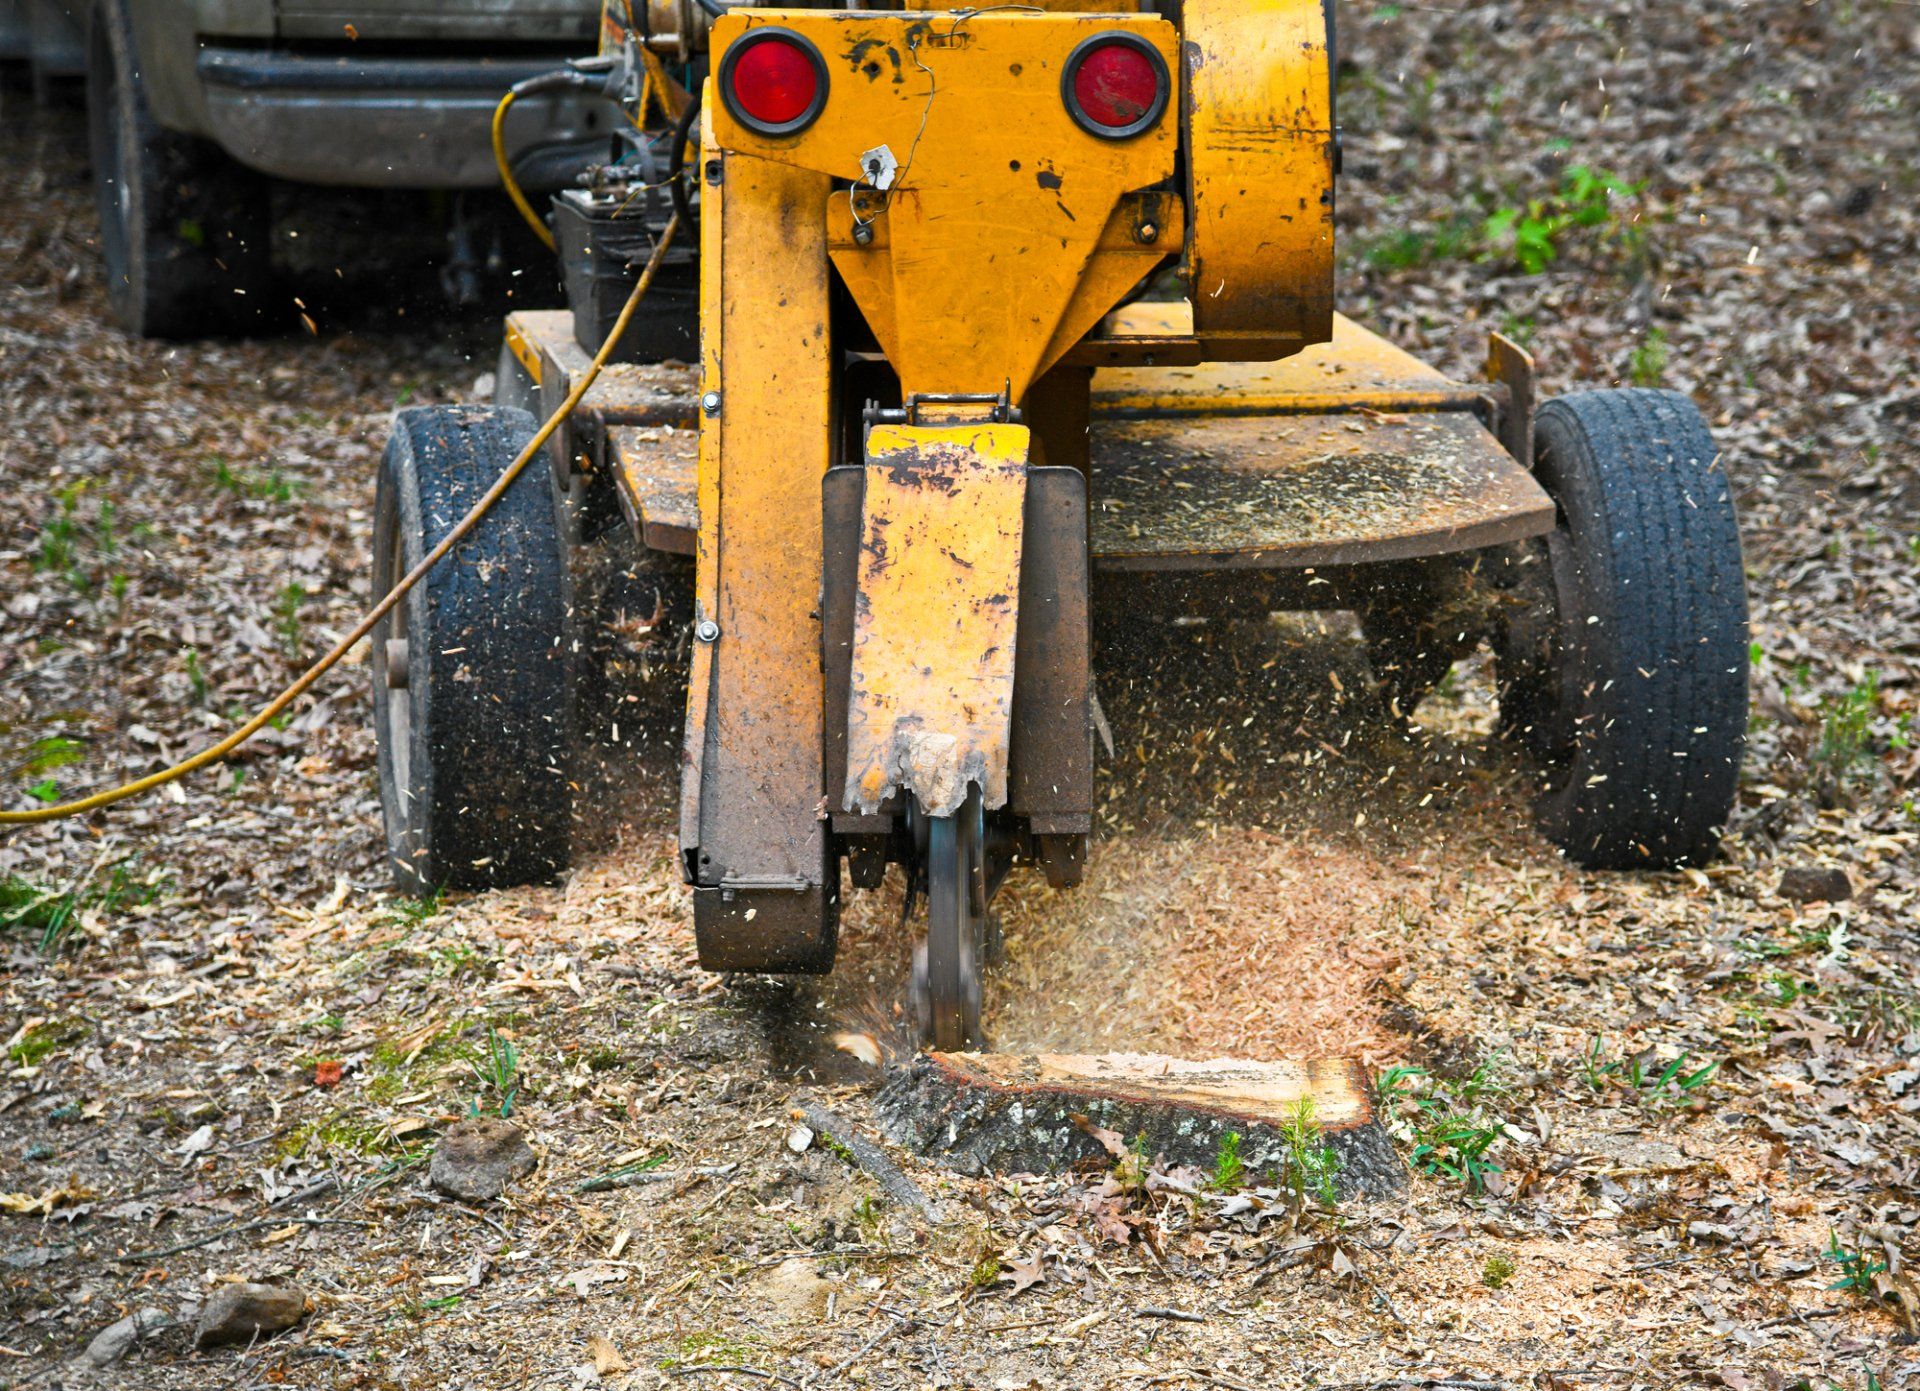 This specialized stump grinding machine is used to grind a tree stump in Boca Raton FL